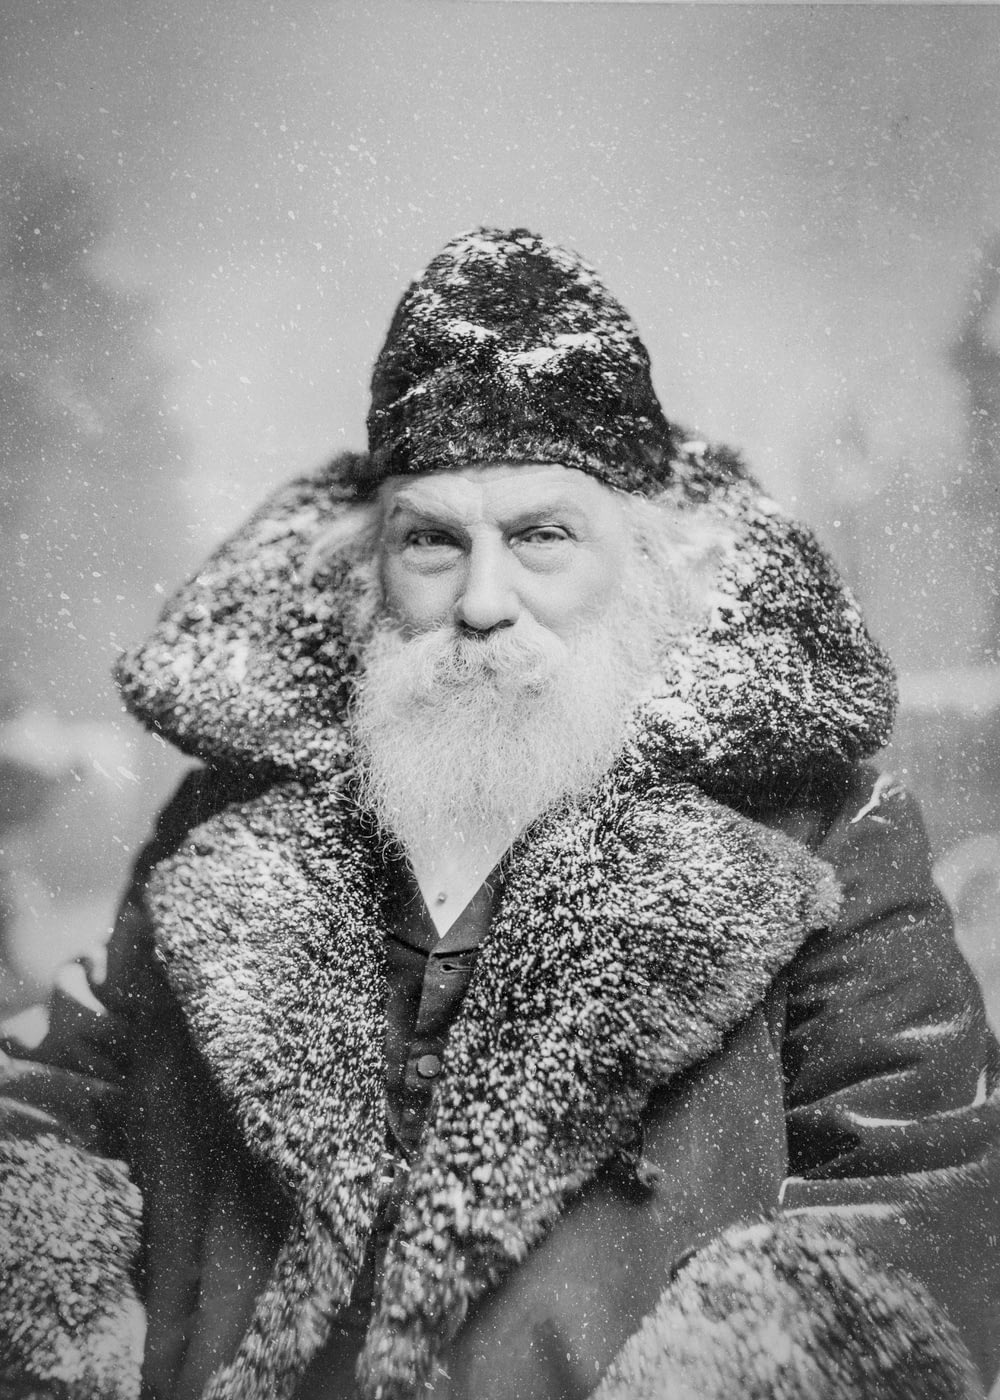 an old photo of a man in a fur coat